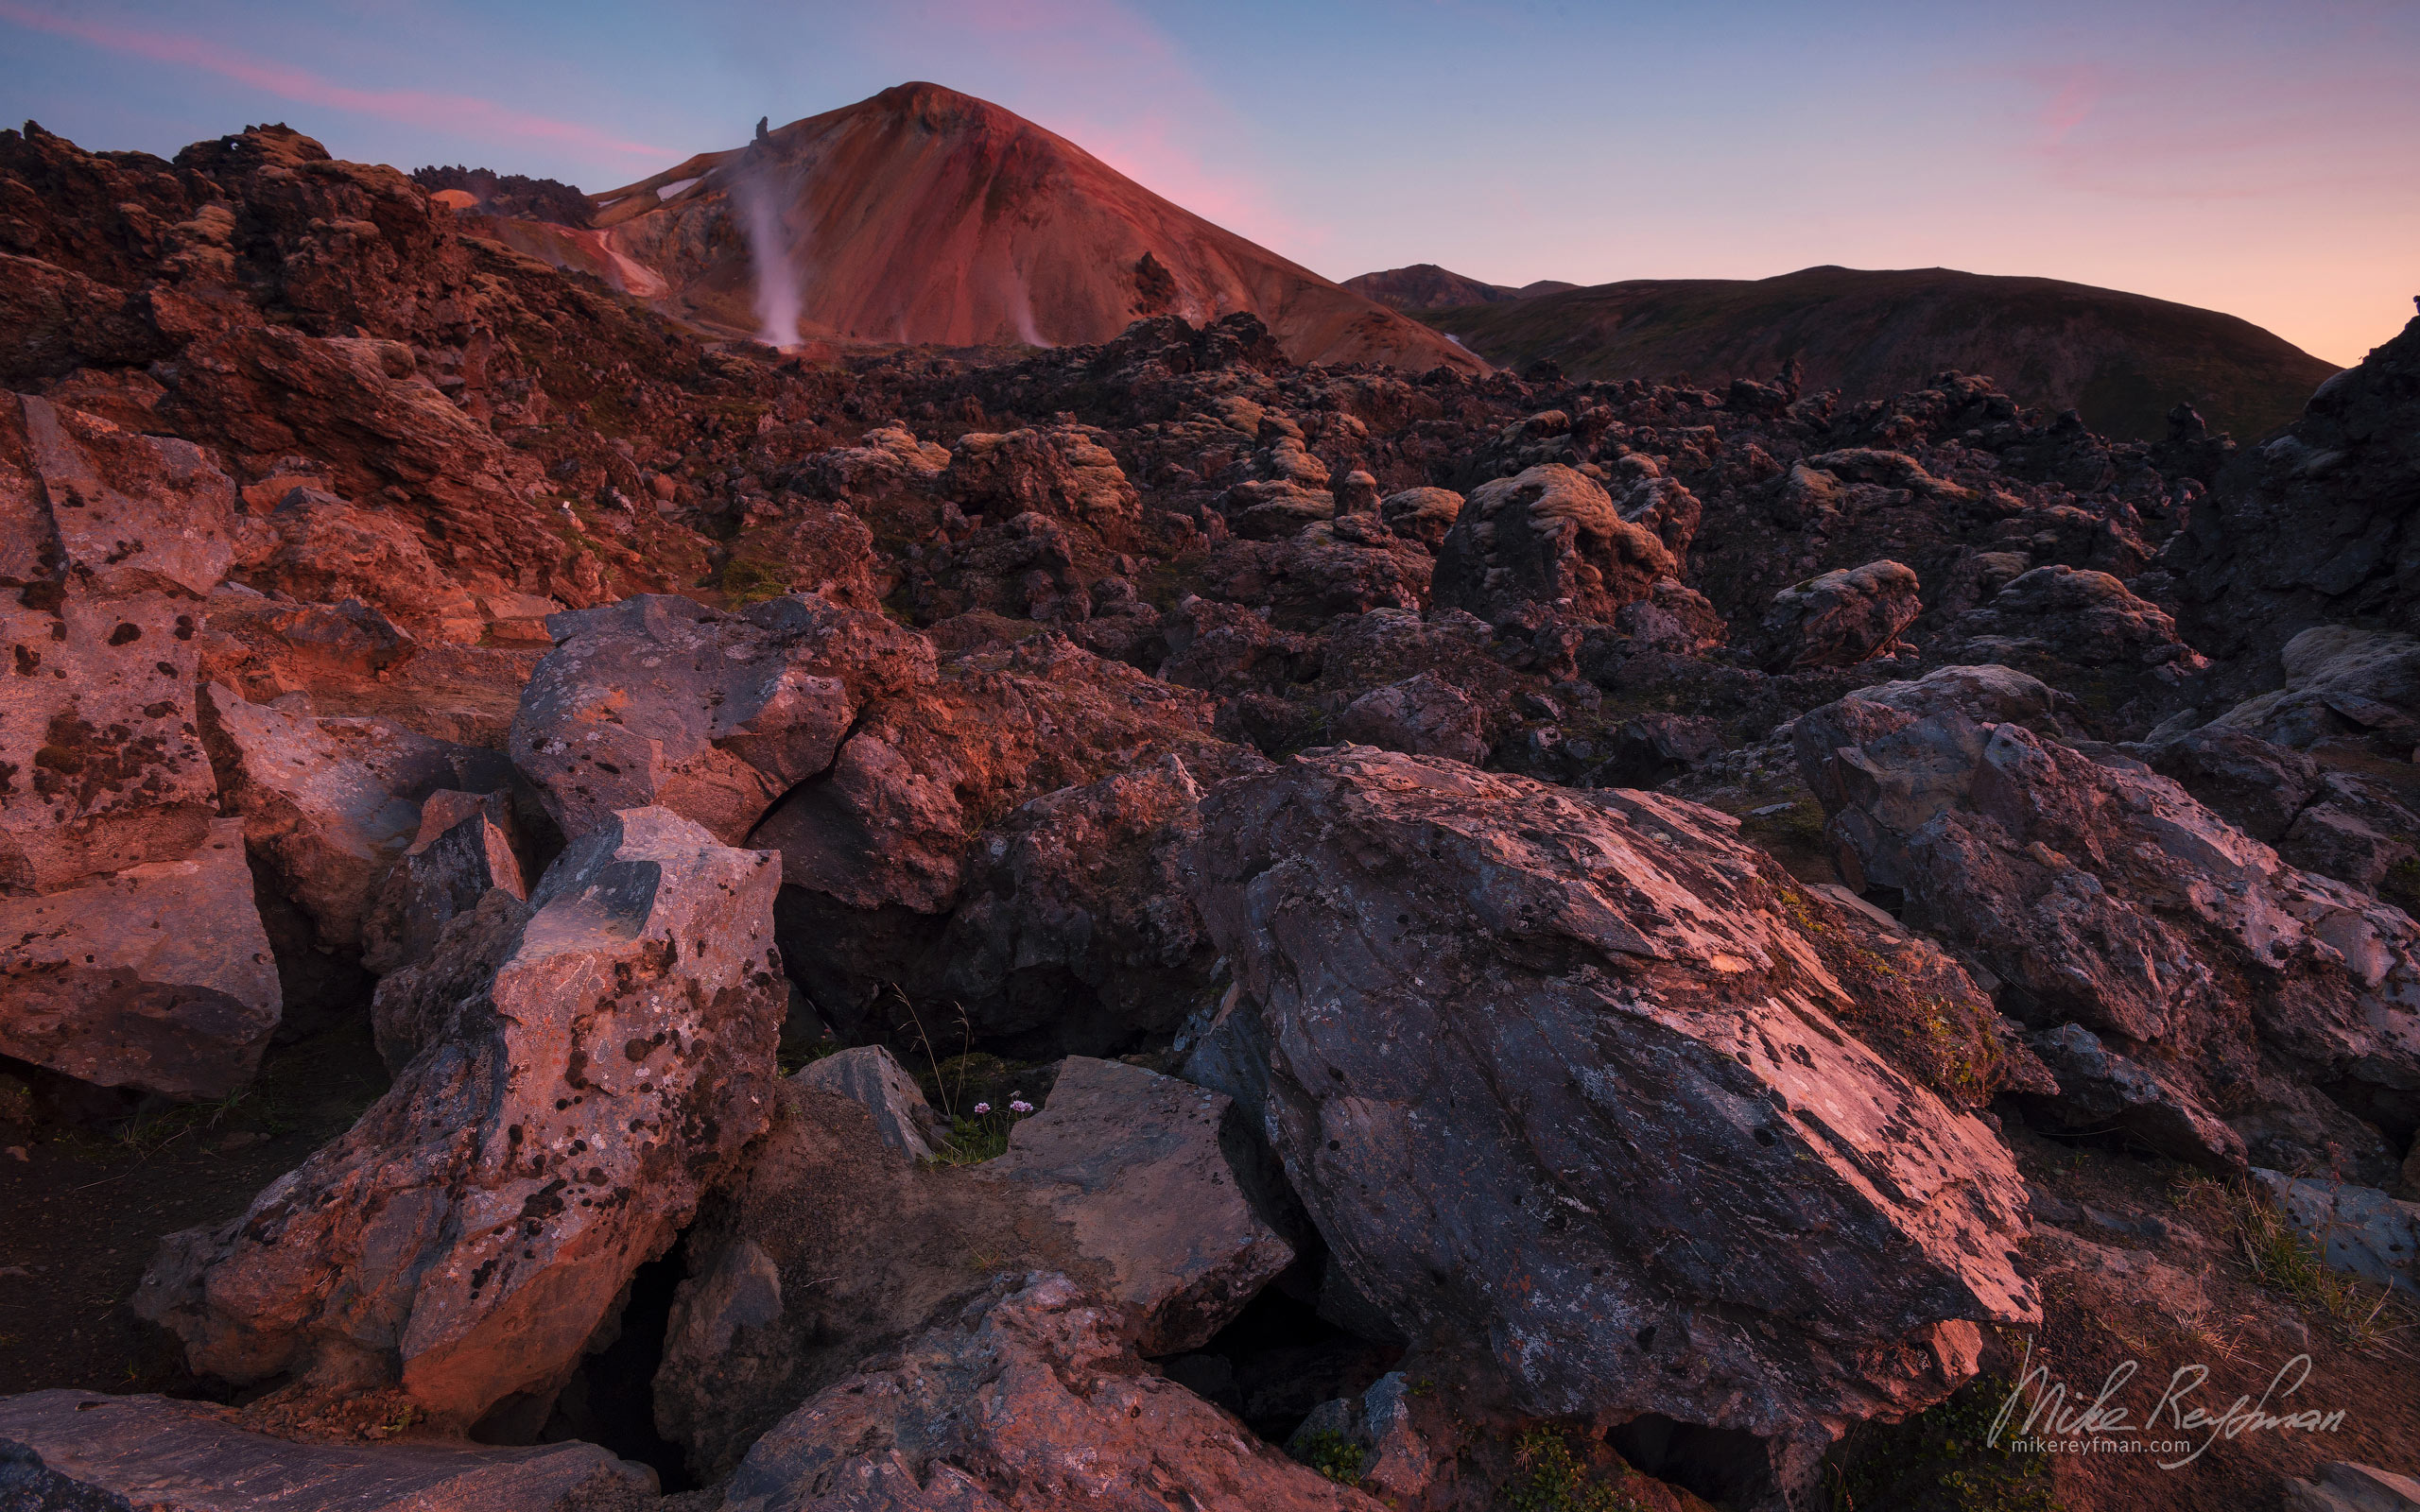 View into Brennisteinsalda Volcano from the Laugahraun Lava Field. Landmannalaugar Mountains, Fjallabak Nature Reserve, Central highlands, Iceland 031-IC-GP _M3X5236 - Rhyolite Mountains, Crater Lakes, Geothermal Areas, Lava Fields and Glacial Rivers. Iceland.  - Mike Reyfman Photography